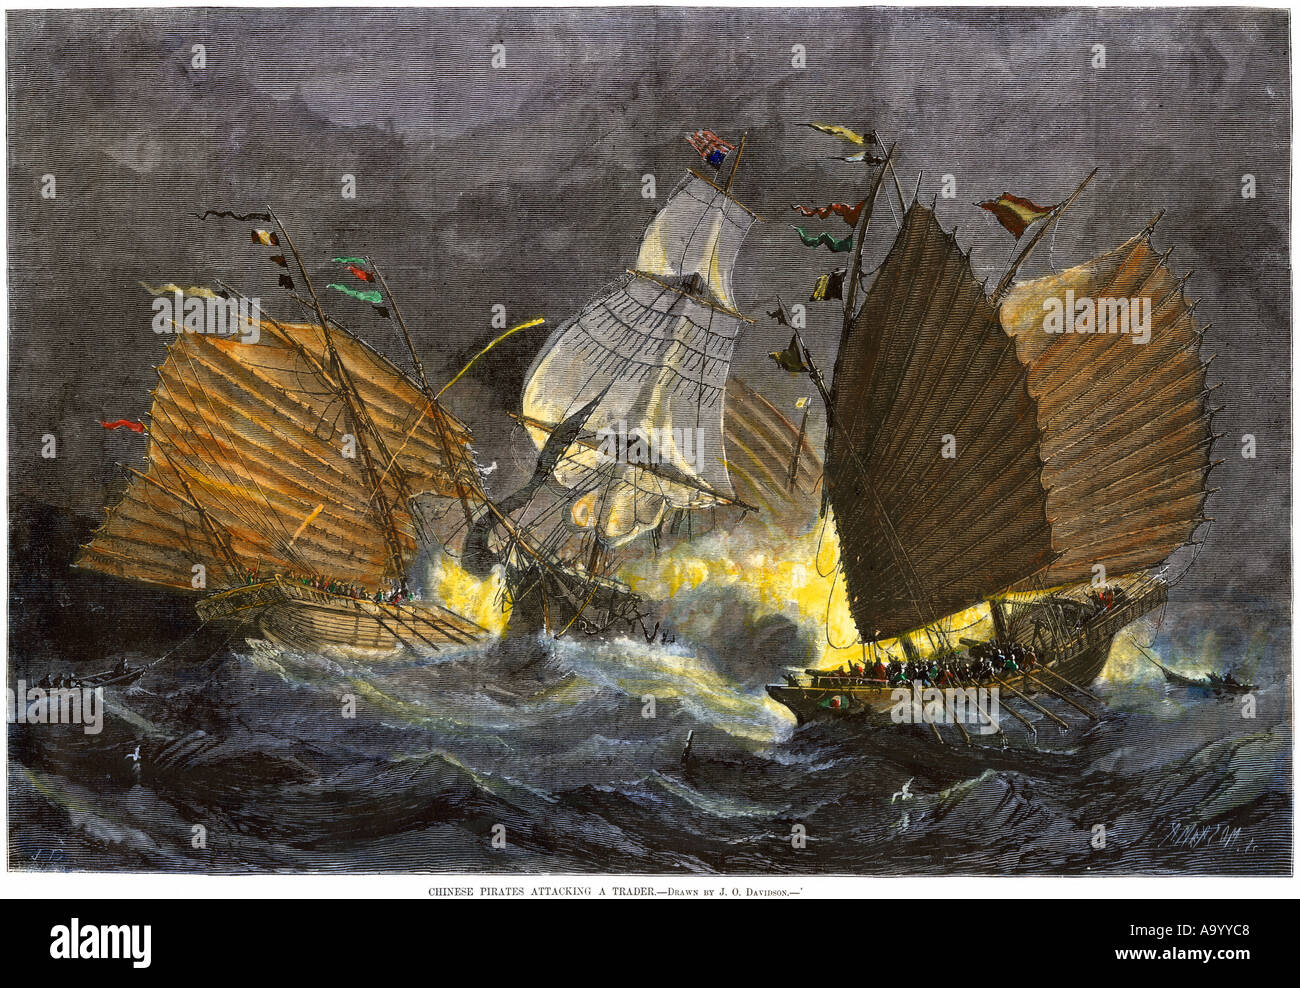 Chinese pirates attacking a merchant ship 1800s. Hand-colored woodcut Stock Photo